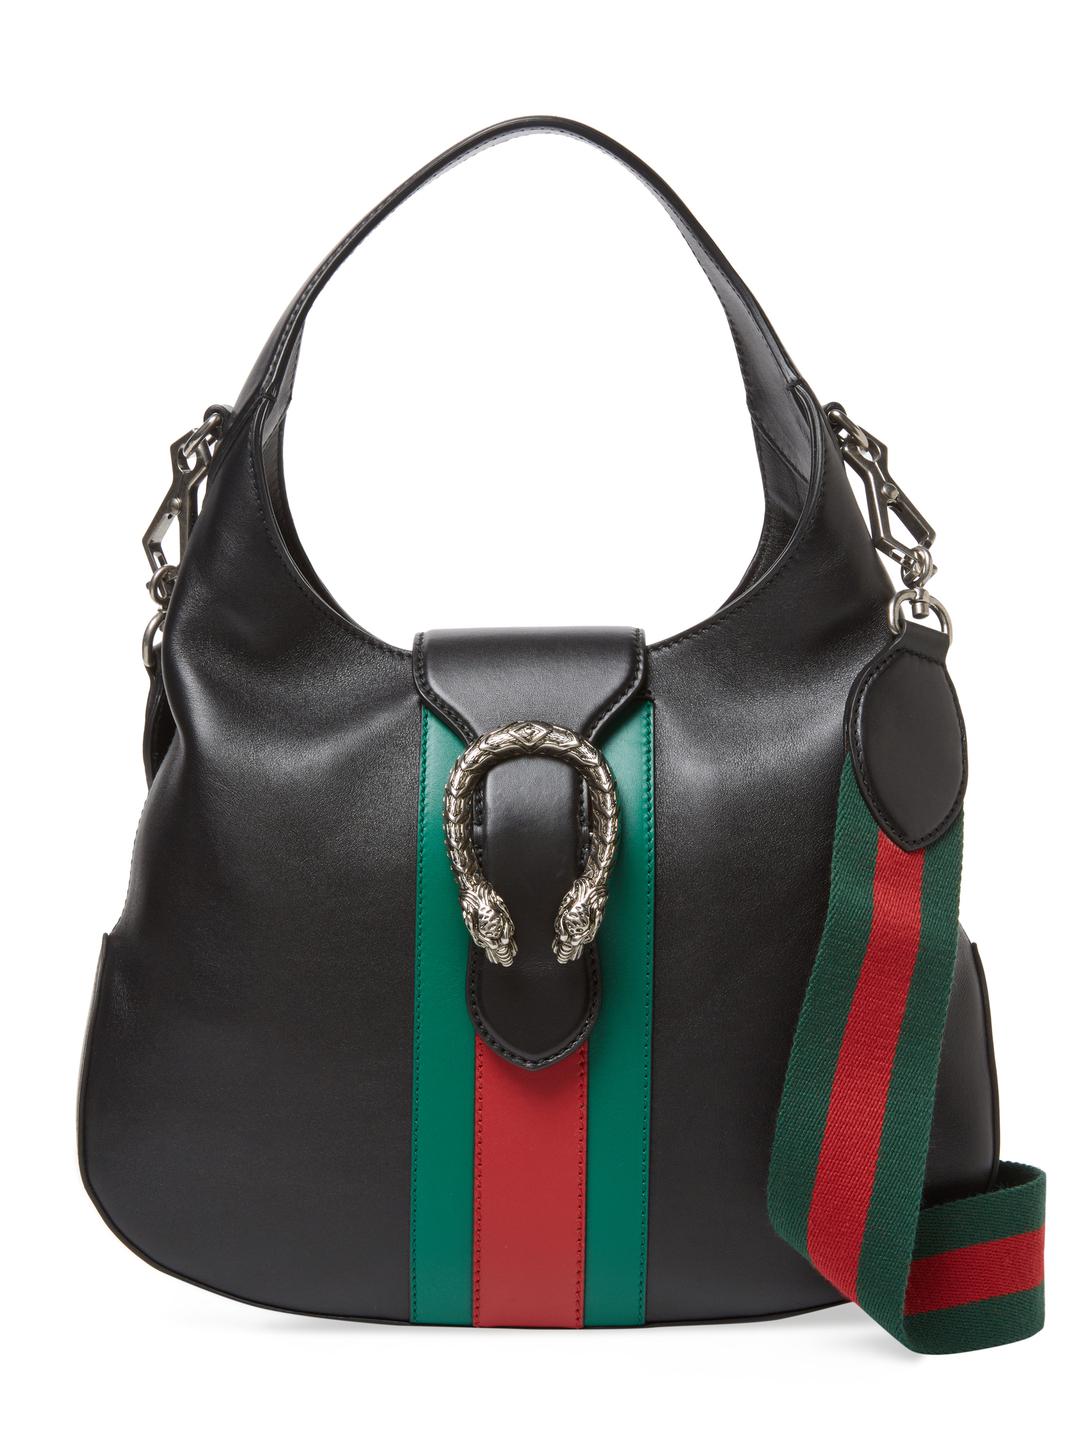 Lyst - Gucci Dionysus Small Leather Hobo in Black